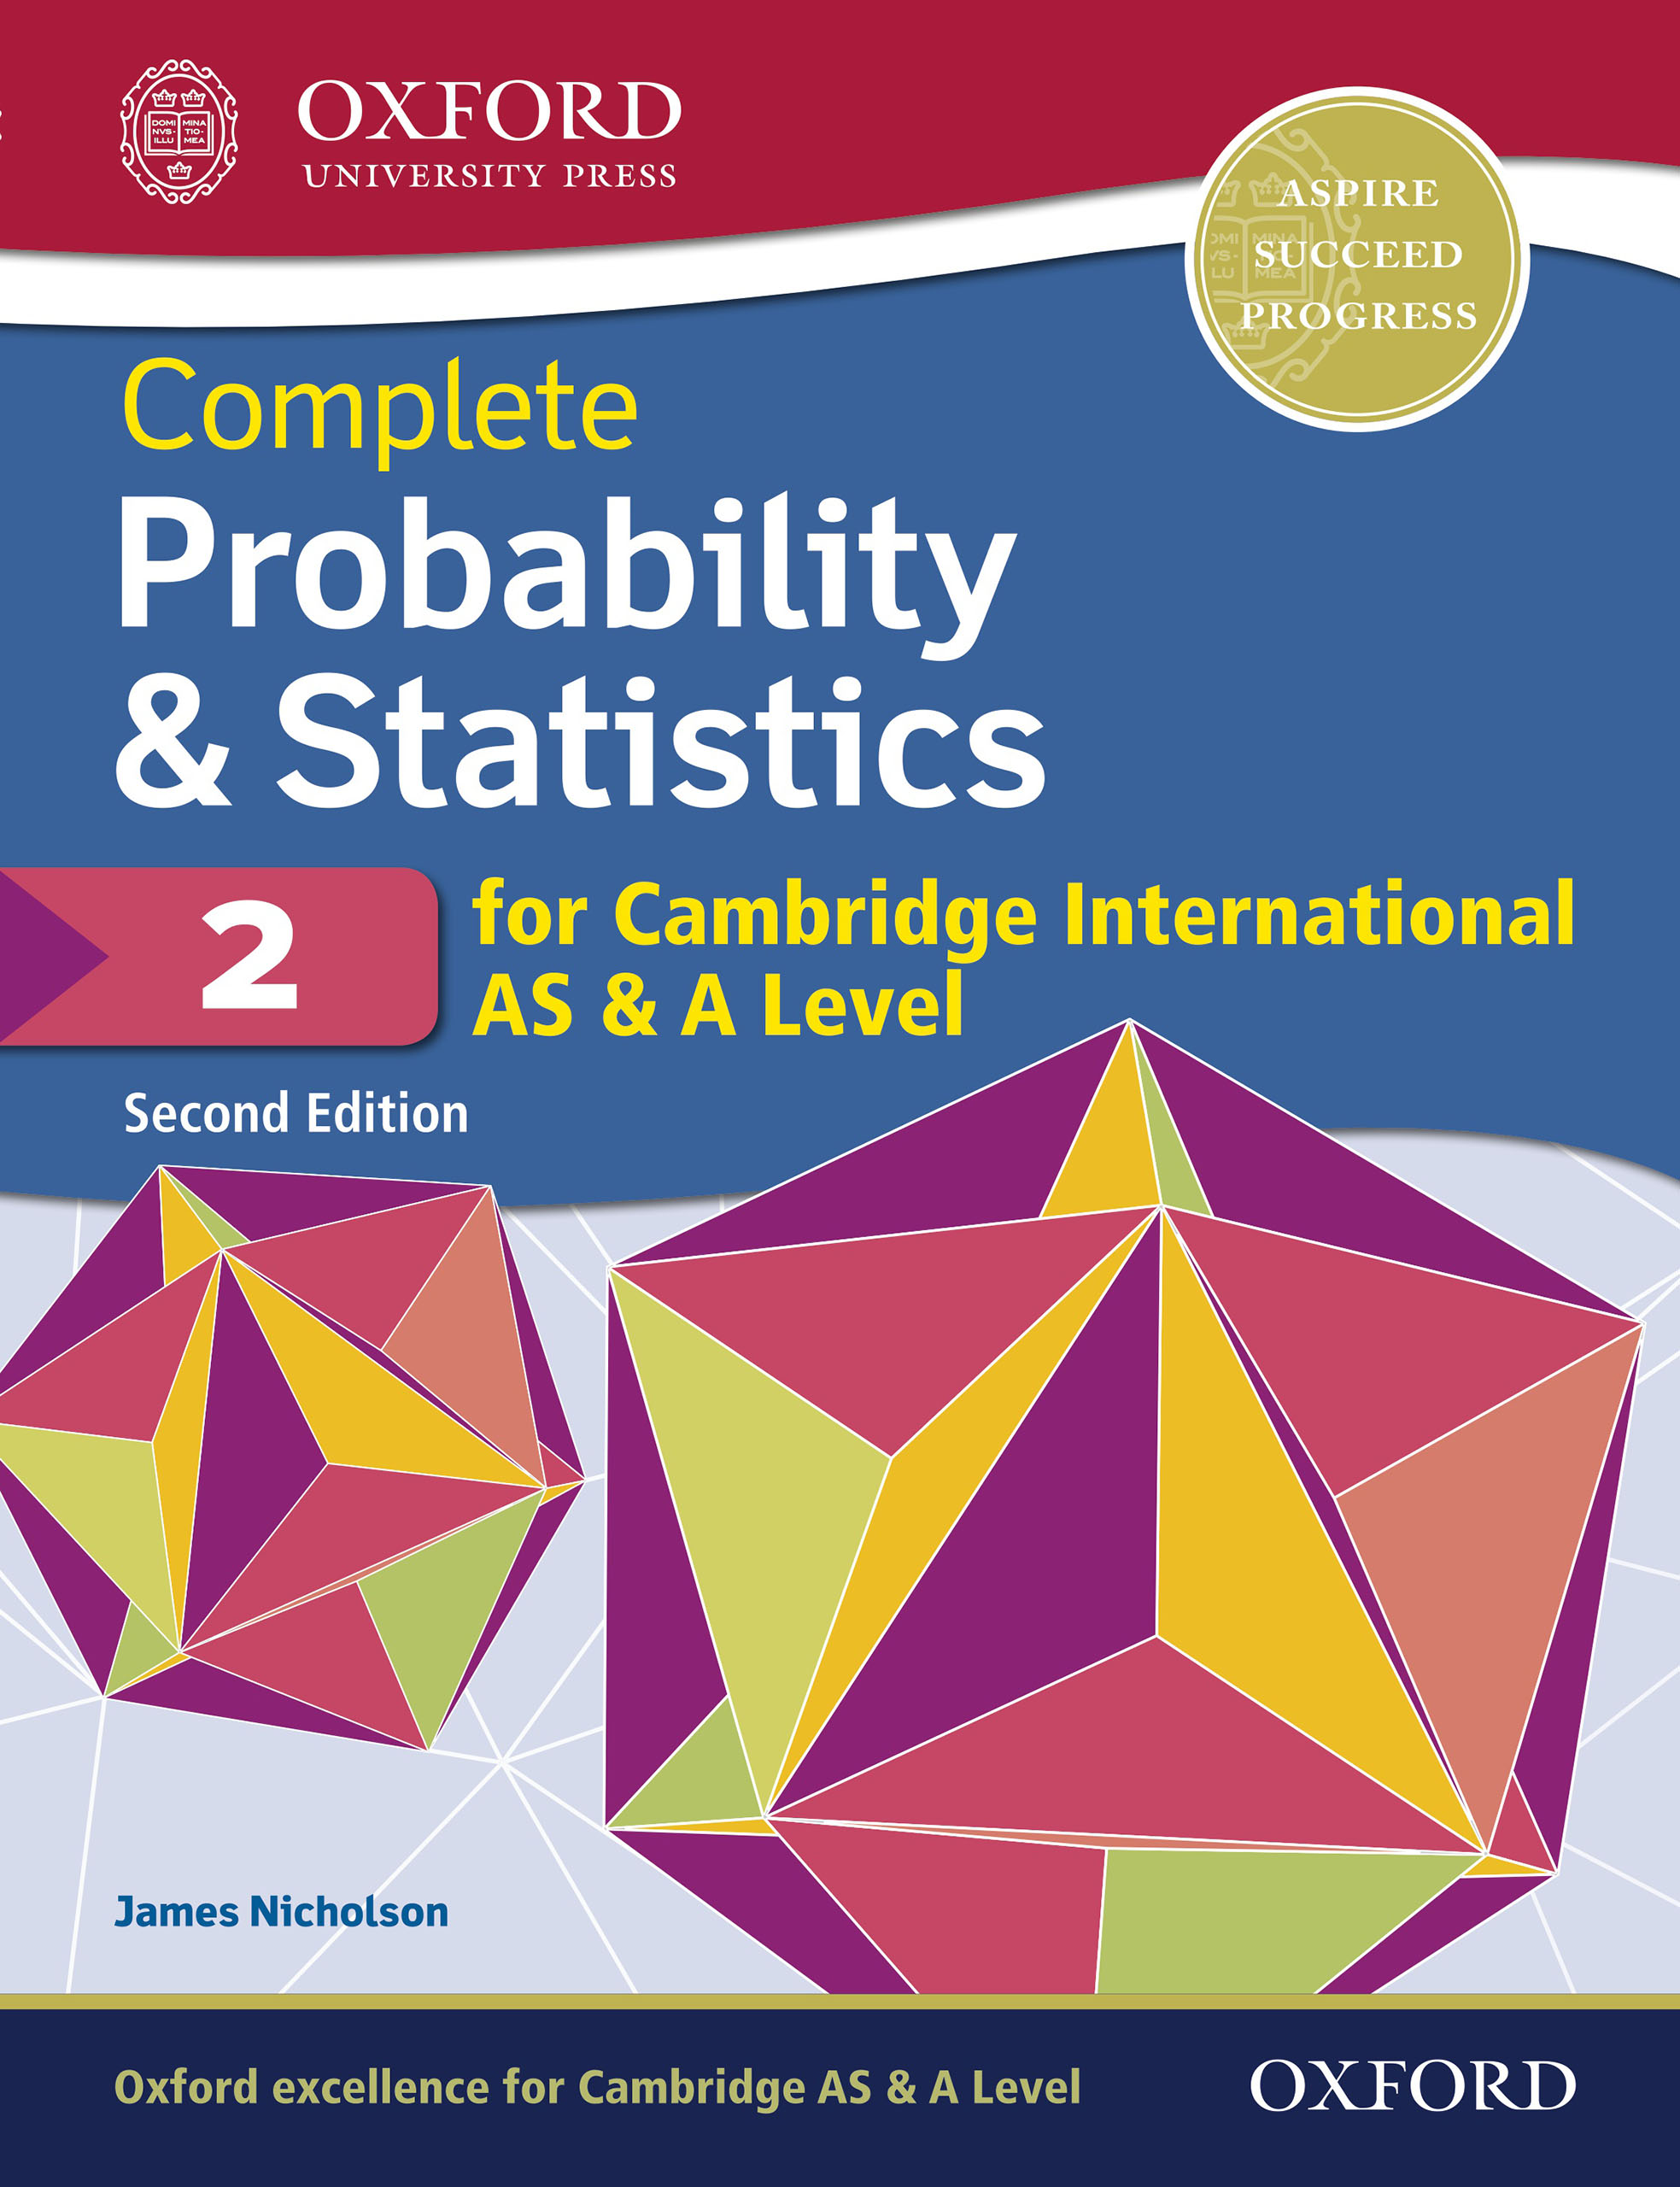 Complete Probability & Statistics 2 for Cambridge International AS & A Level